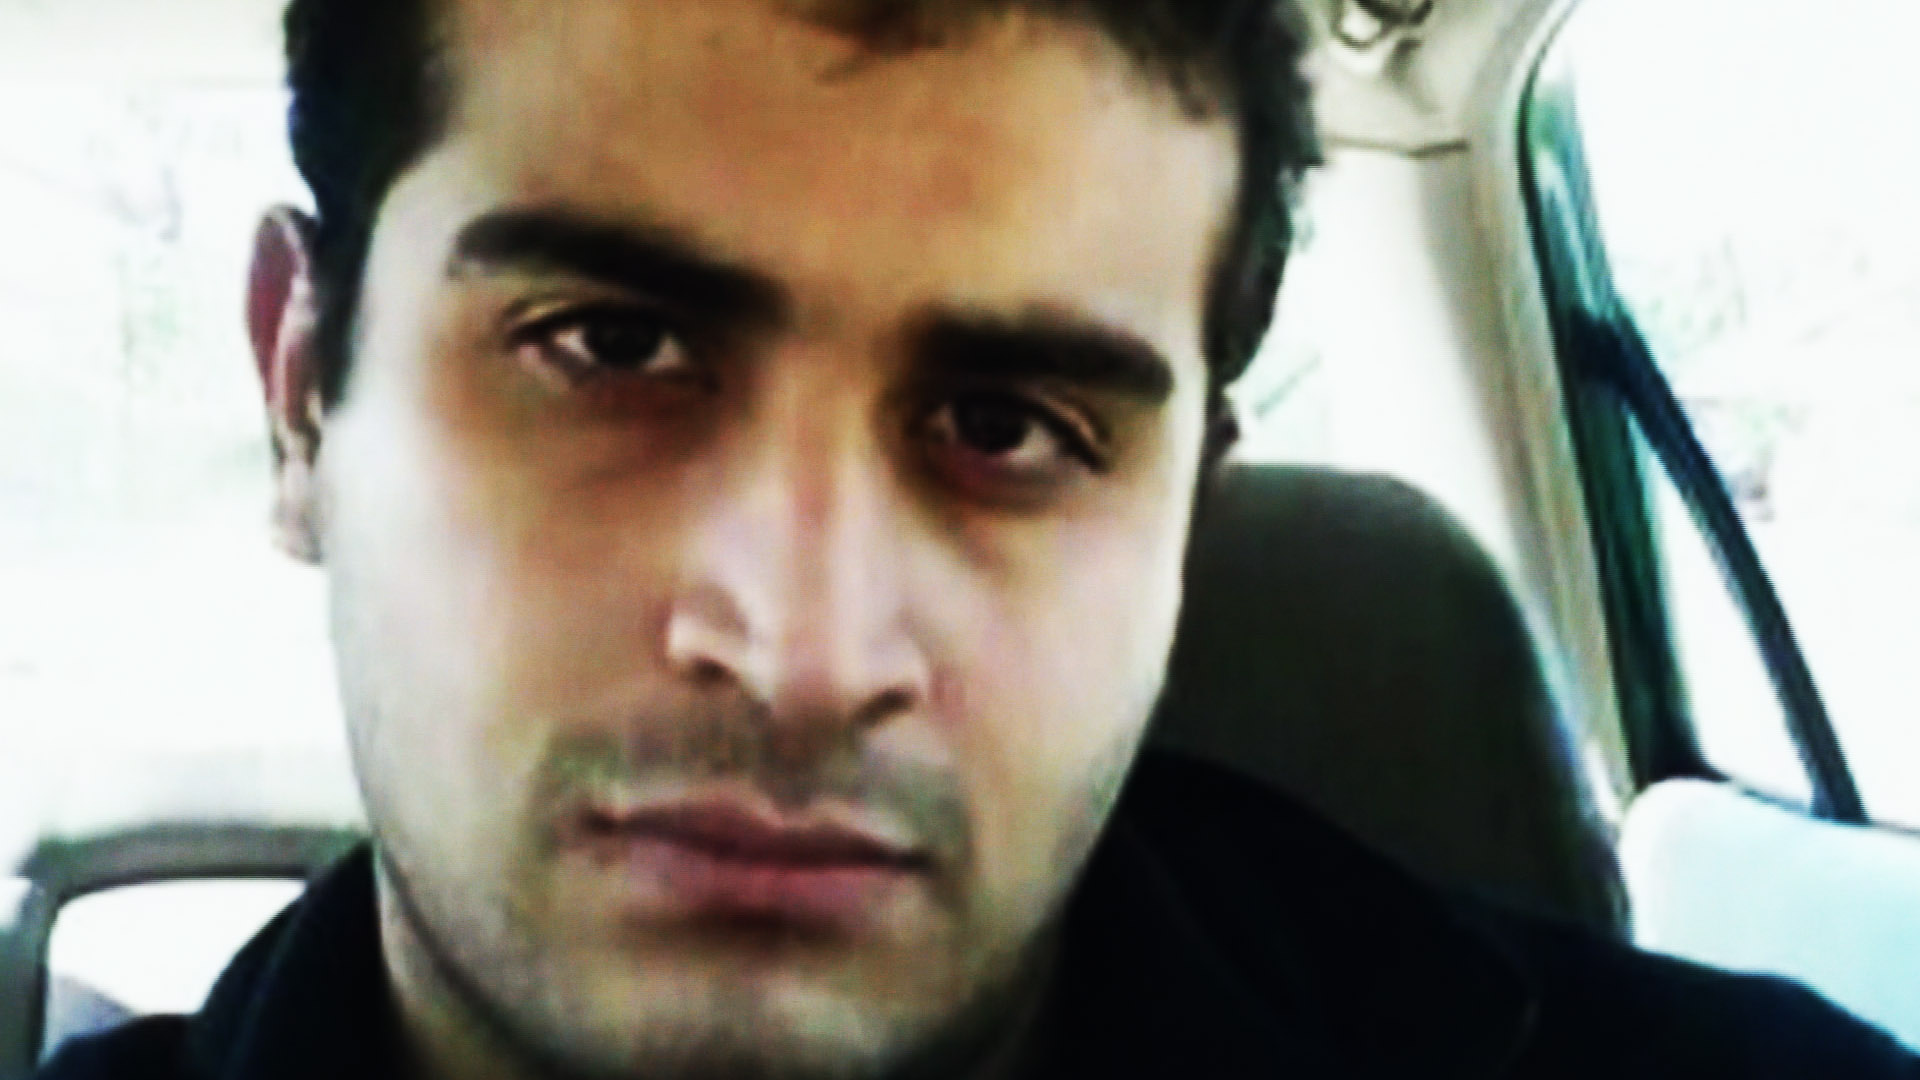 What we know about Omar Mateen, the Orlando nightclub shooter